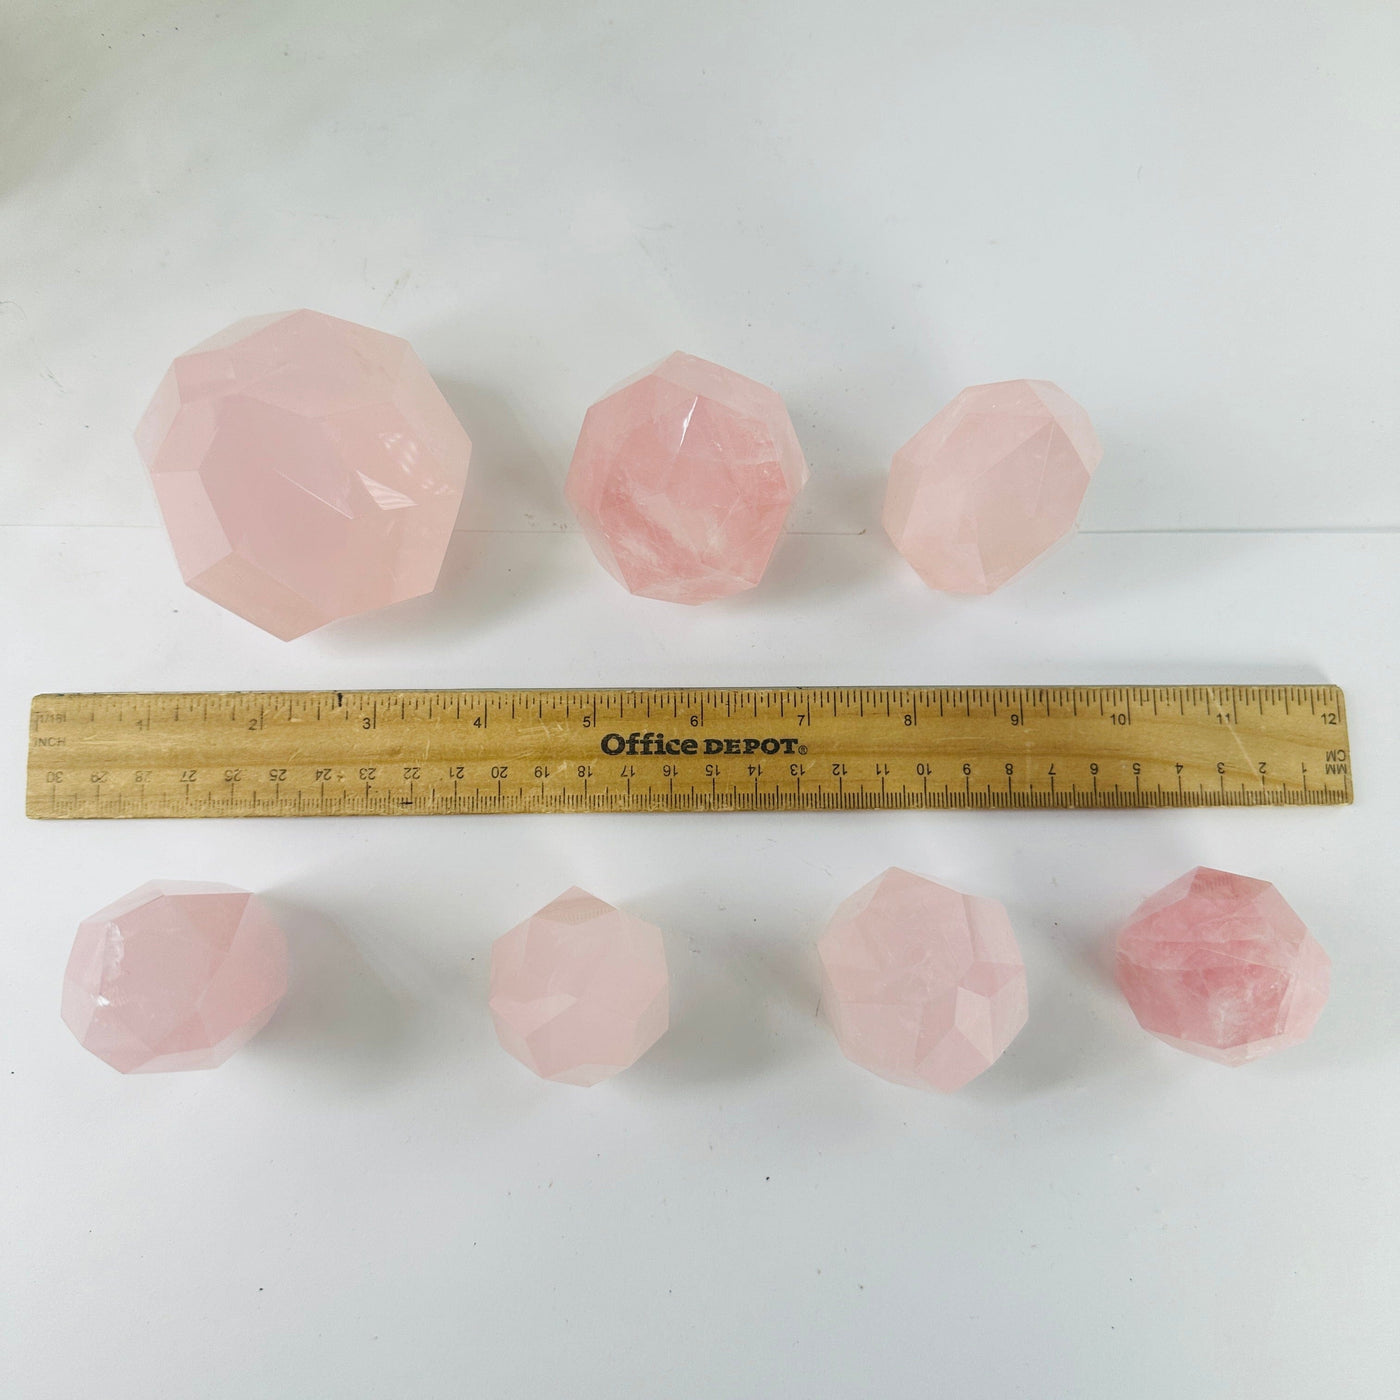  Rose Quartz Faceted Crystal Egg Point - You Choose - all variants top view with ruler for size reference